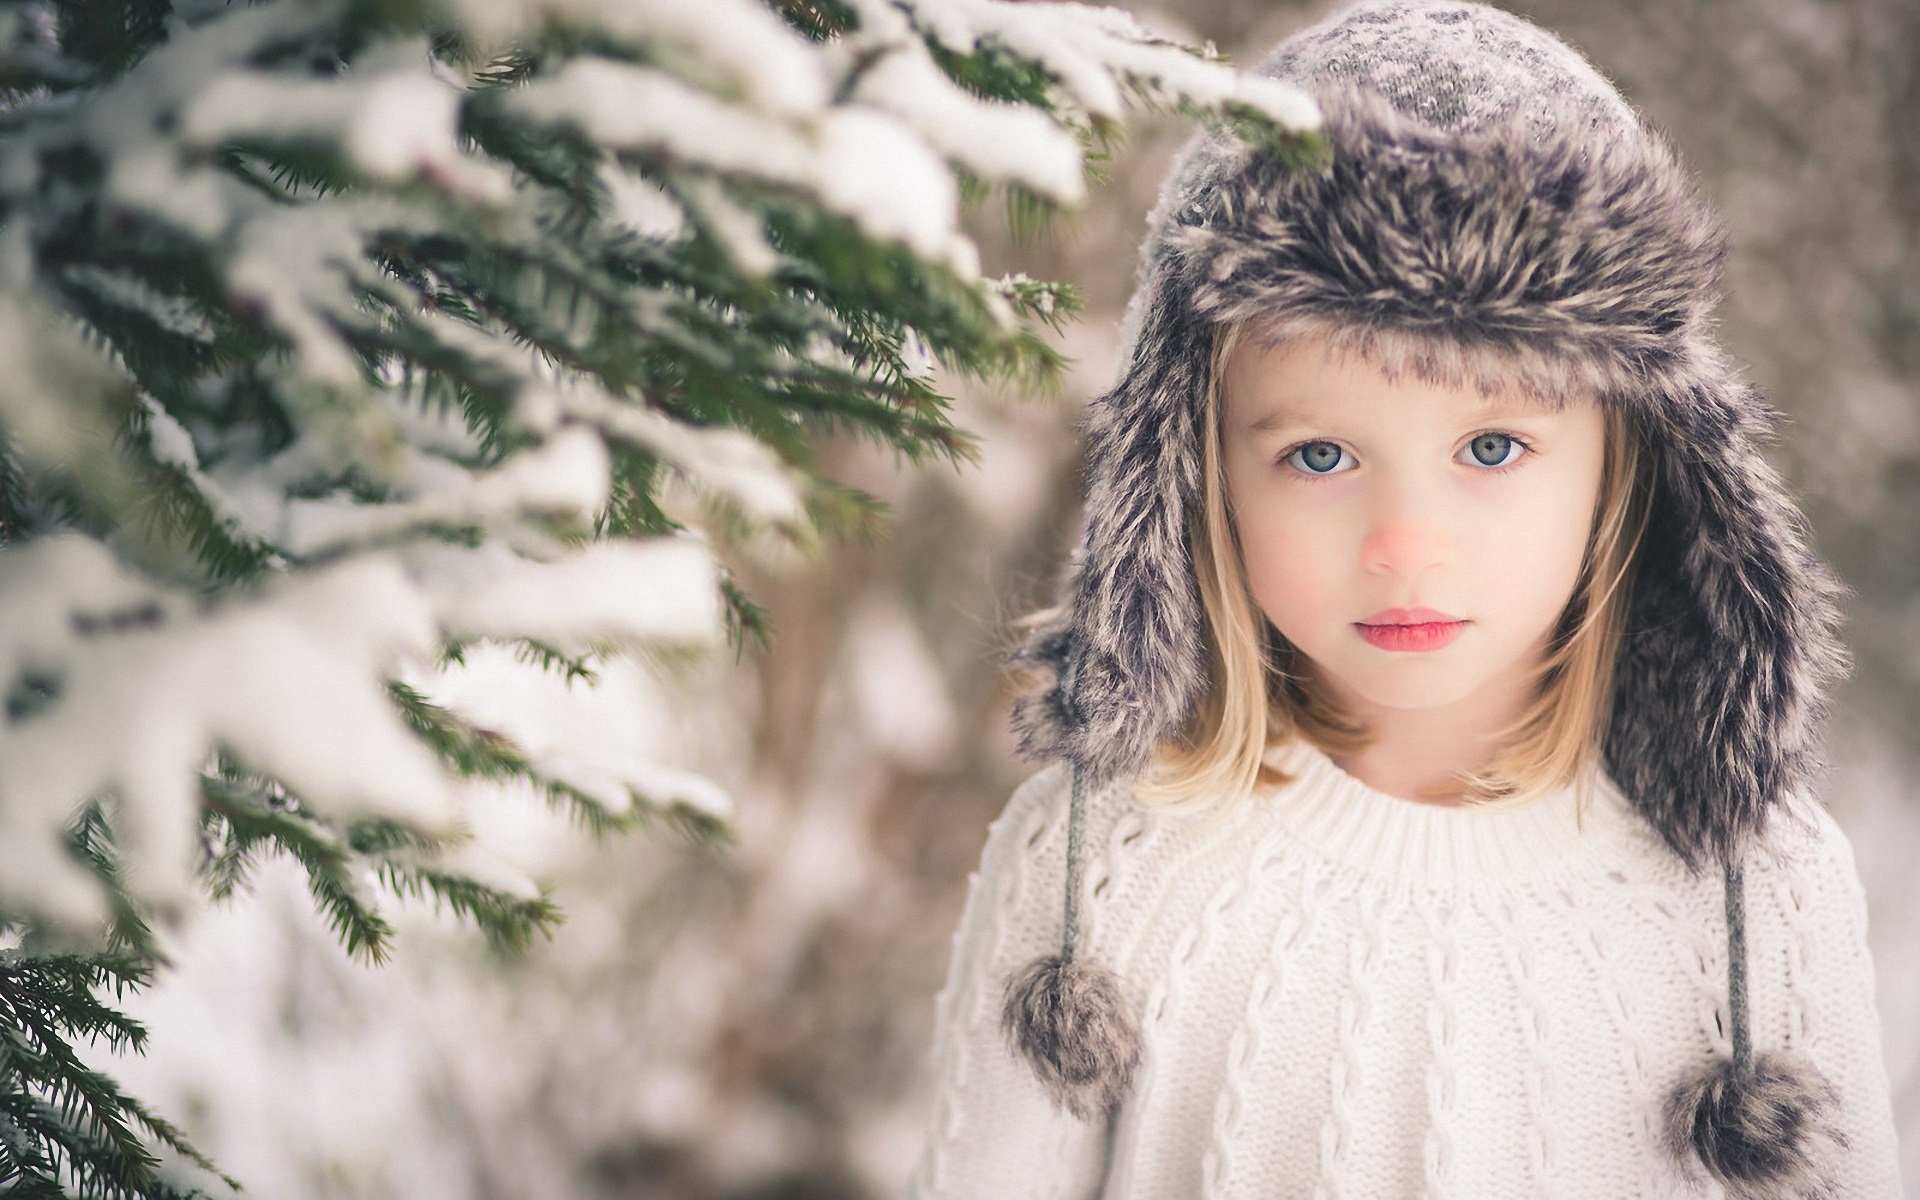 Cute Winter Snow Wallpapers